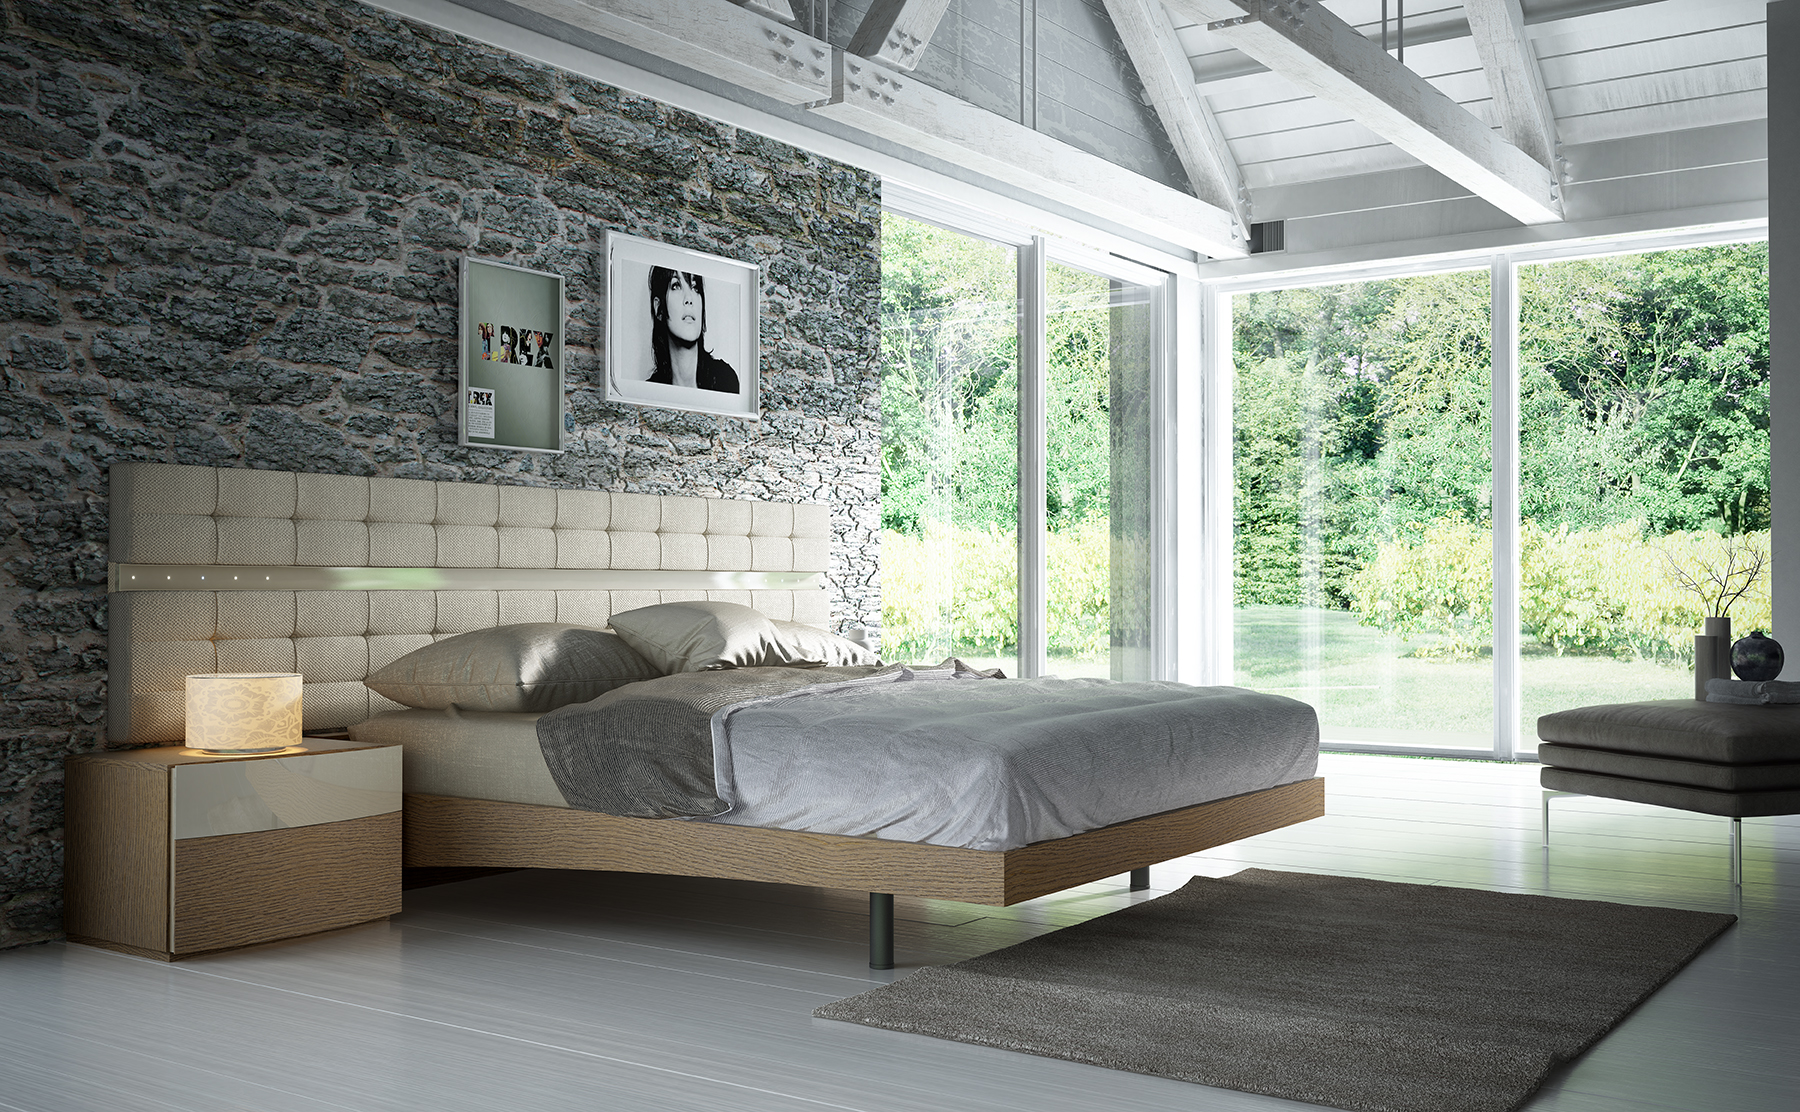 Fashionable Wood Platform and Headboard Bed with Lights - Click Image to Close